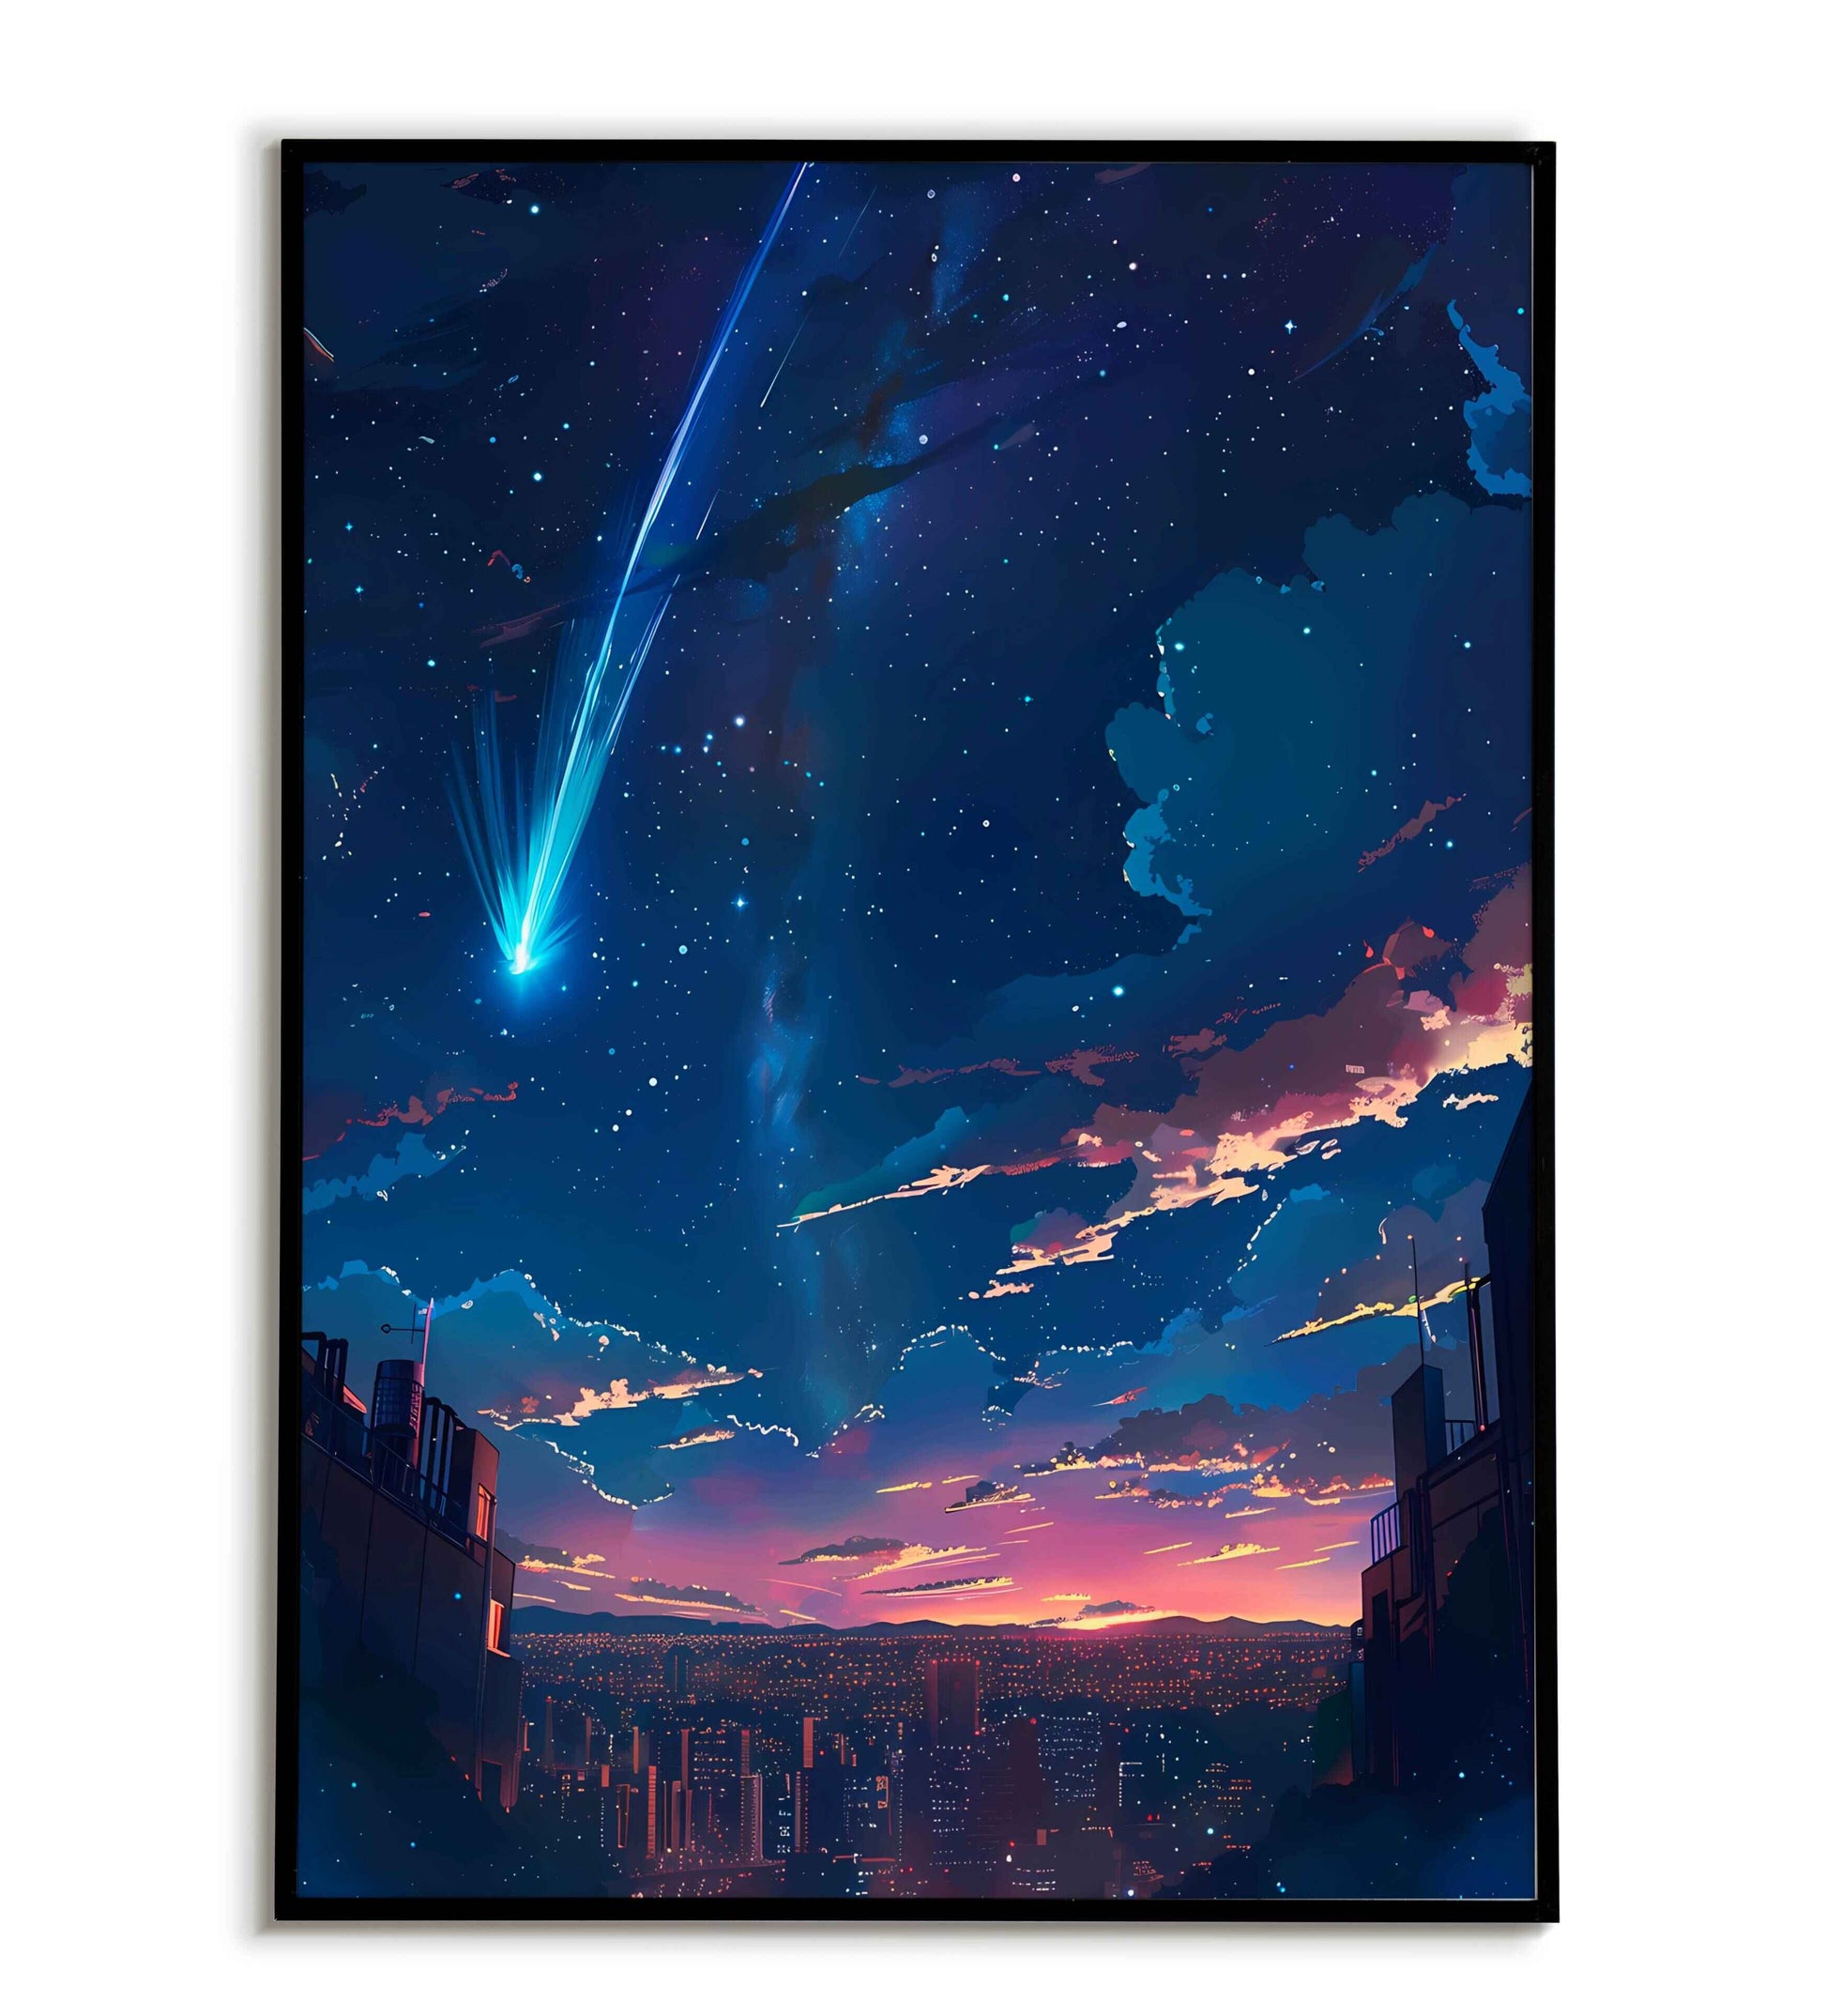 Starfall printable poster. Available for purchase as a physical poster or digital download.